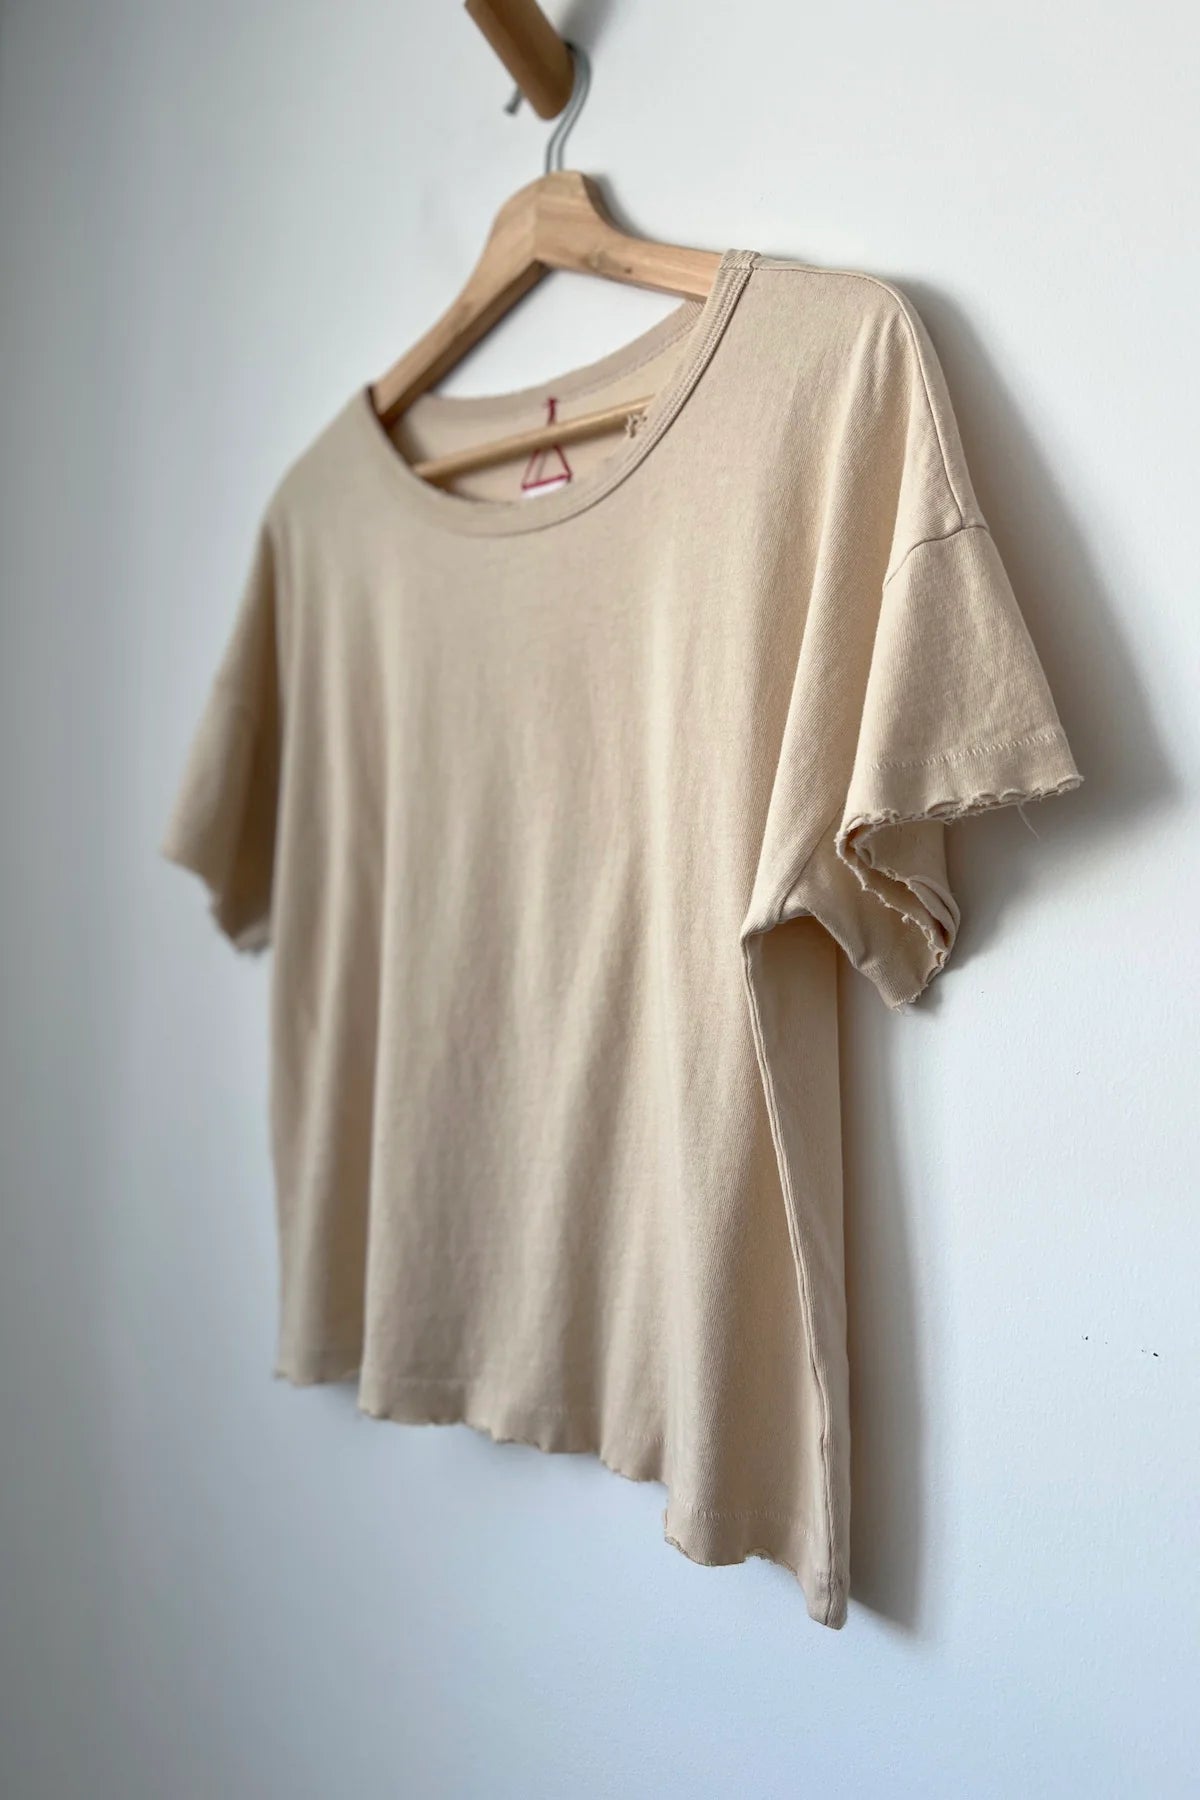 The Vintage Fille Tee in Horchata by Le Bon Shoppe